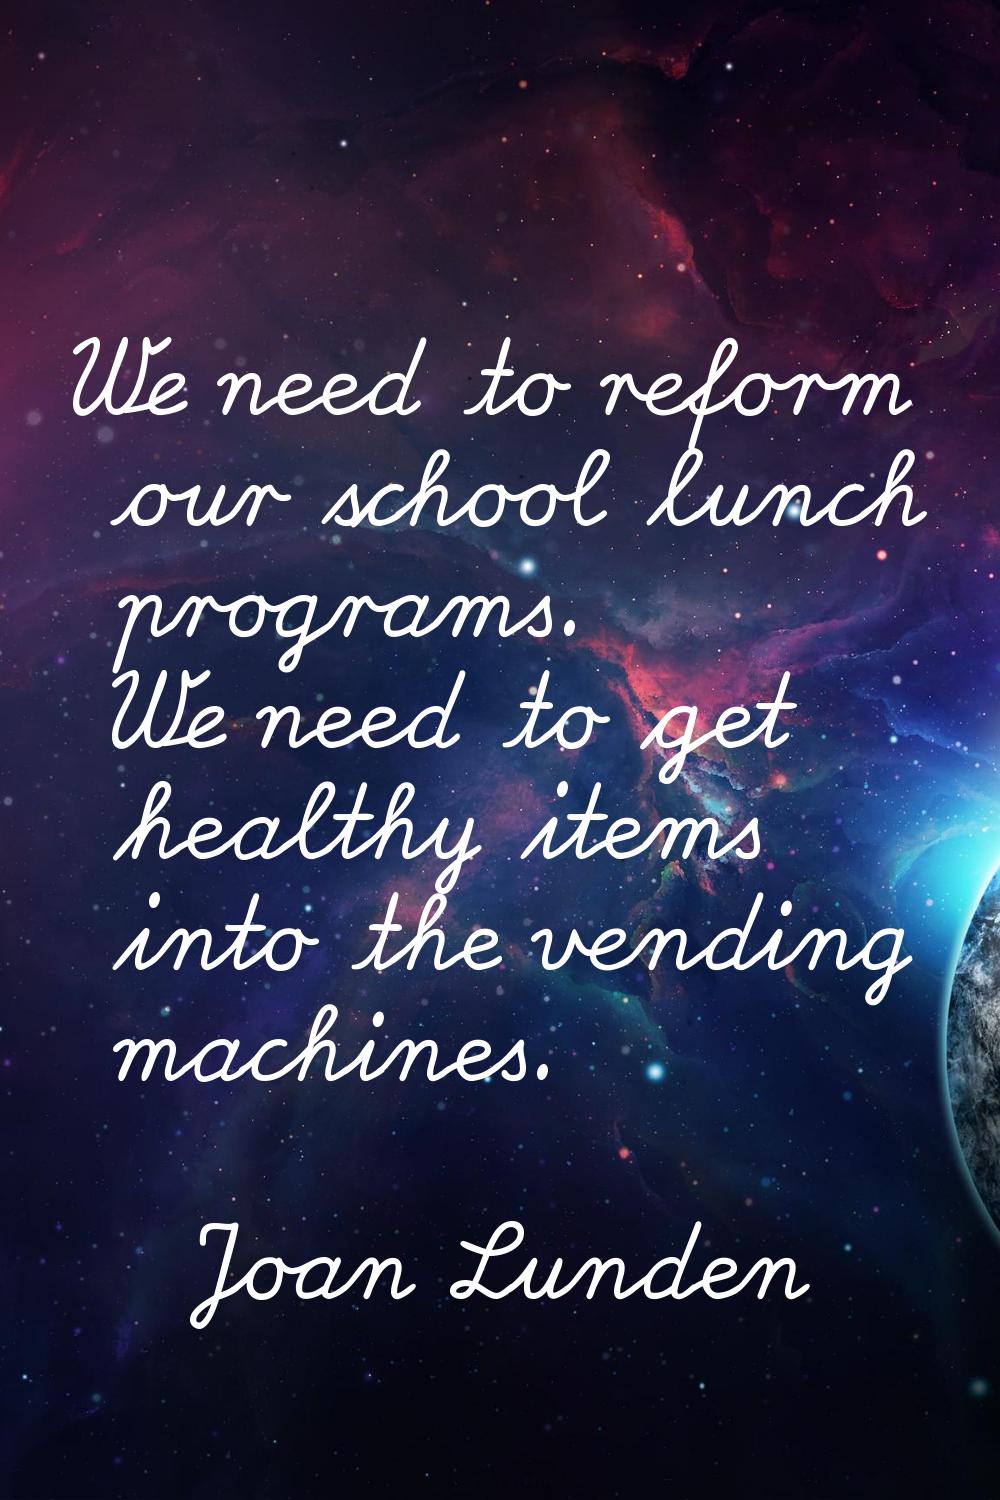 We need to reform our school lunch programs. We need to get healthy items into the vending machines